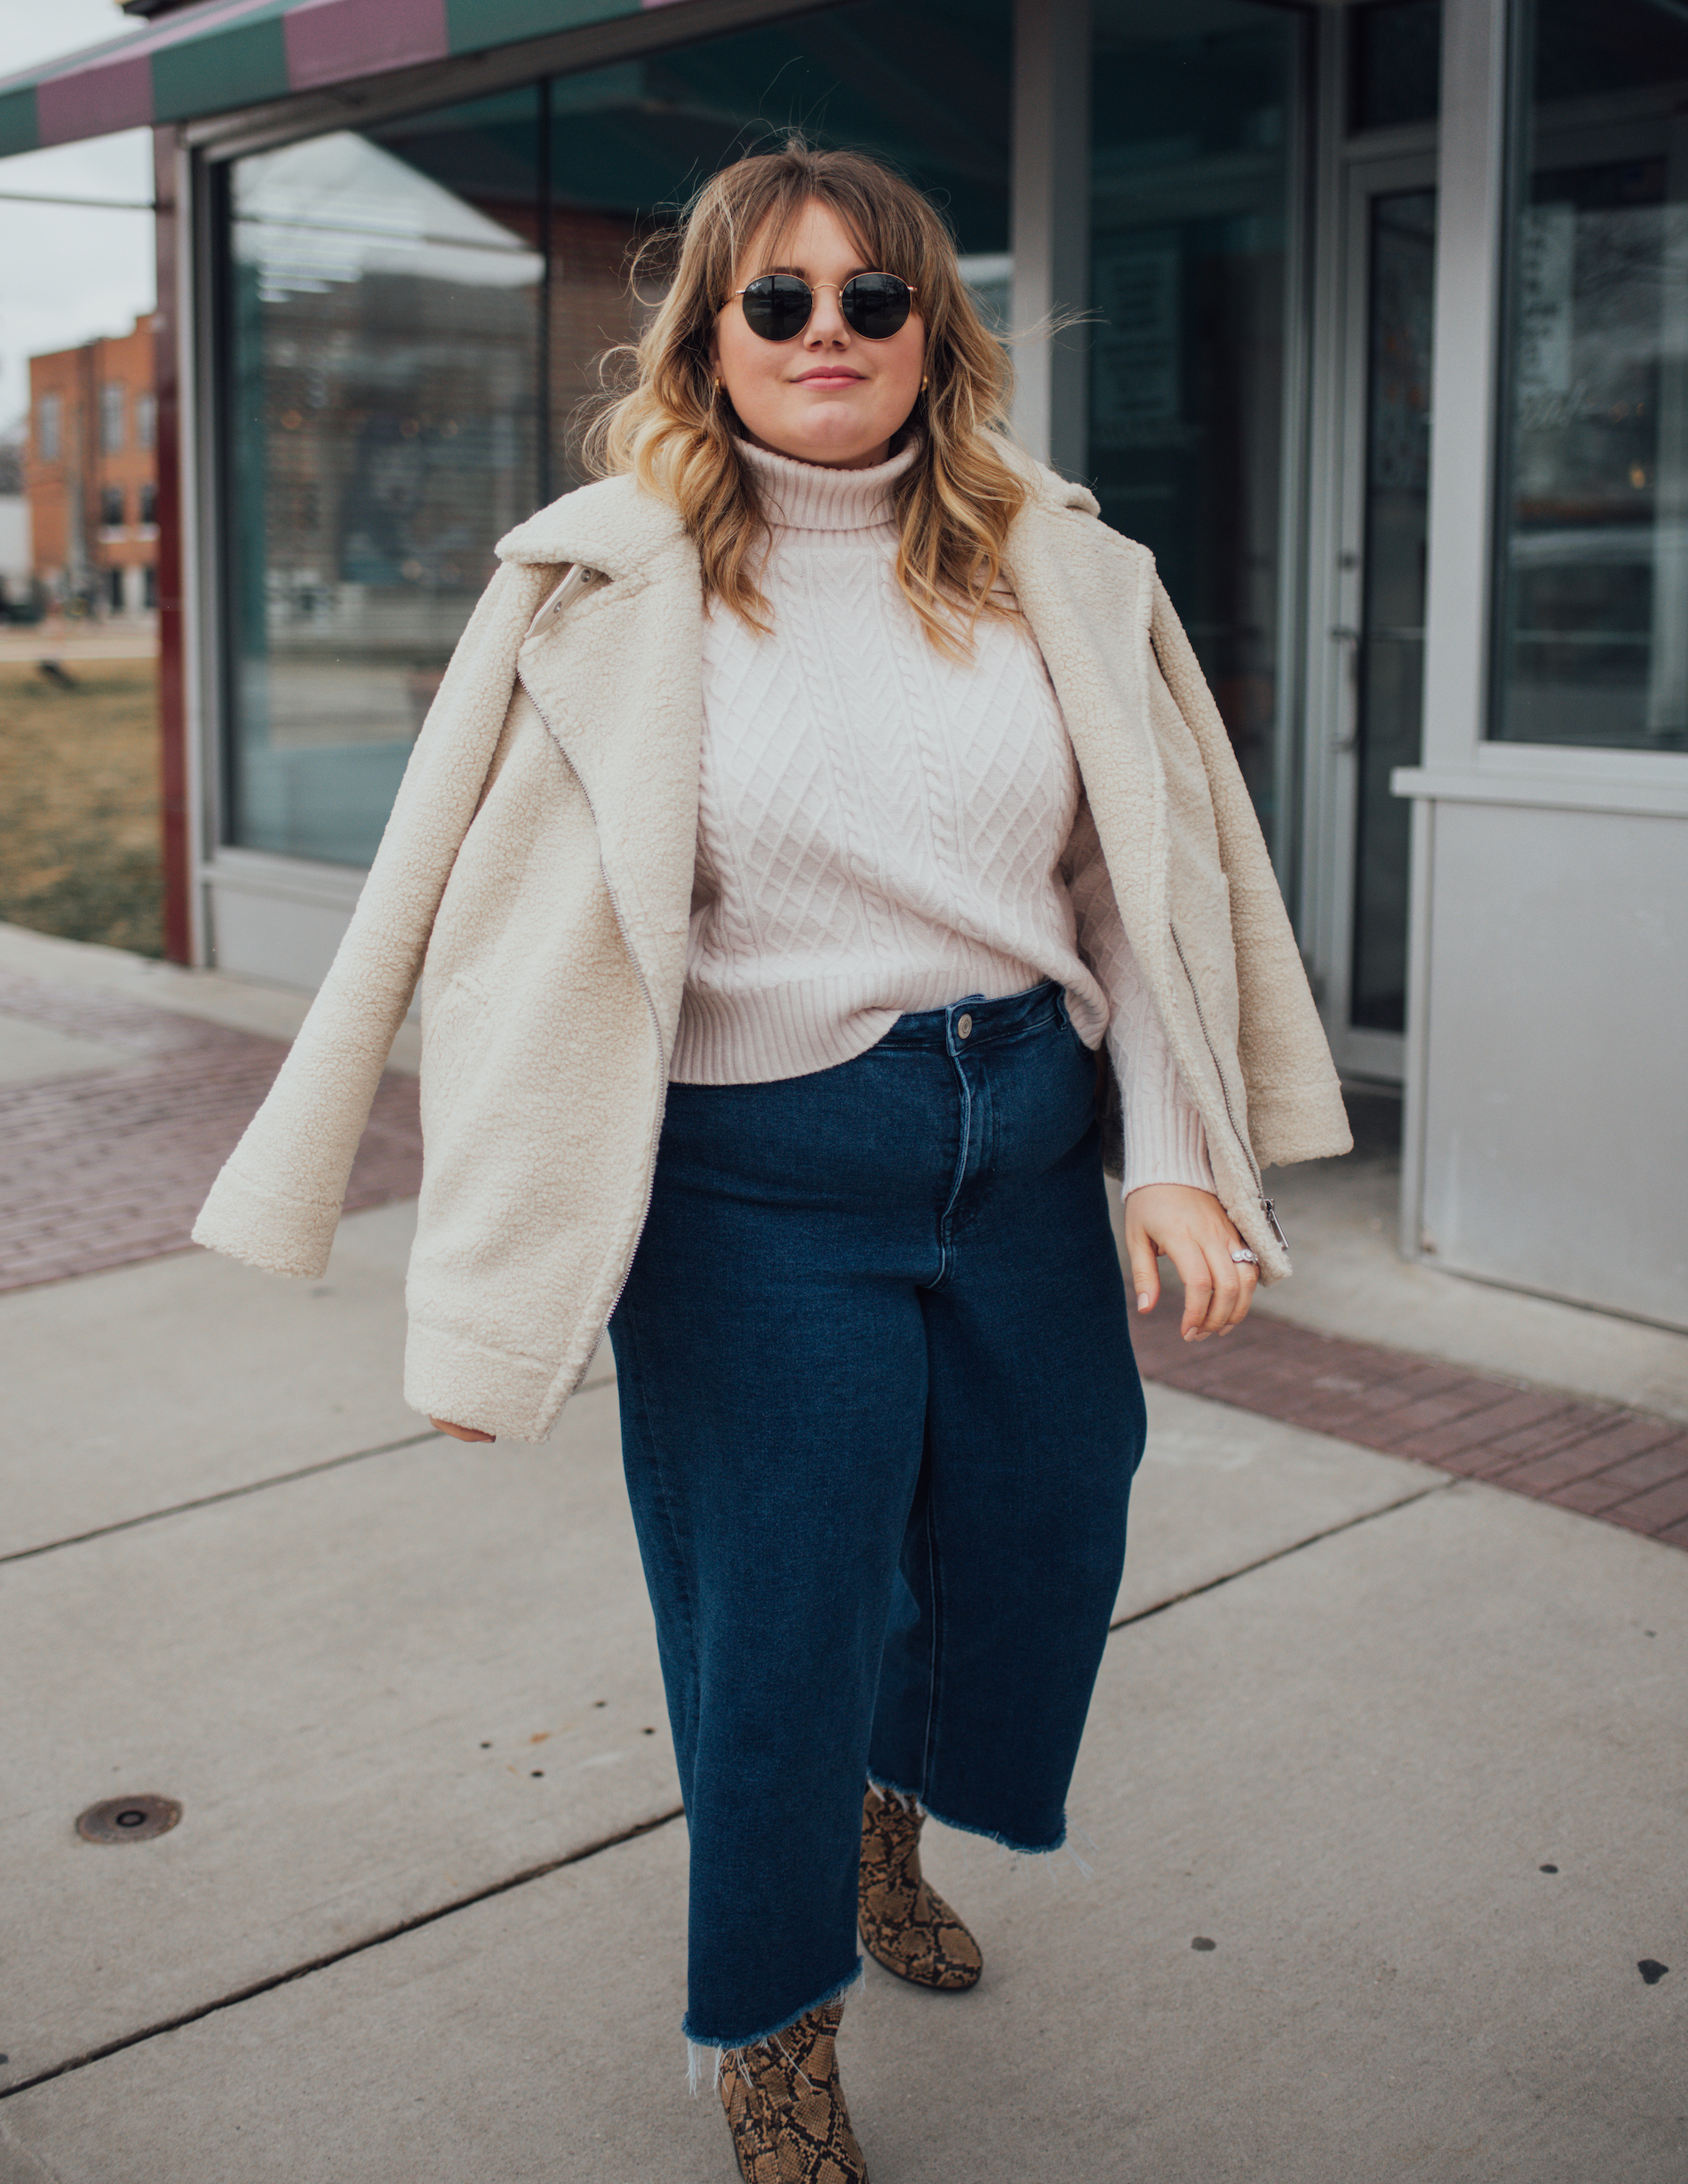 Keeping my fashion sense alive with some Winter Neutrals! One of my favorite things about the coldest season is layering! 